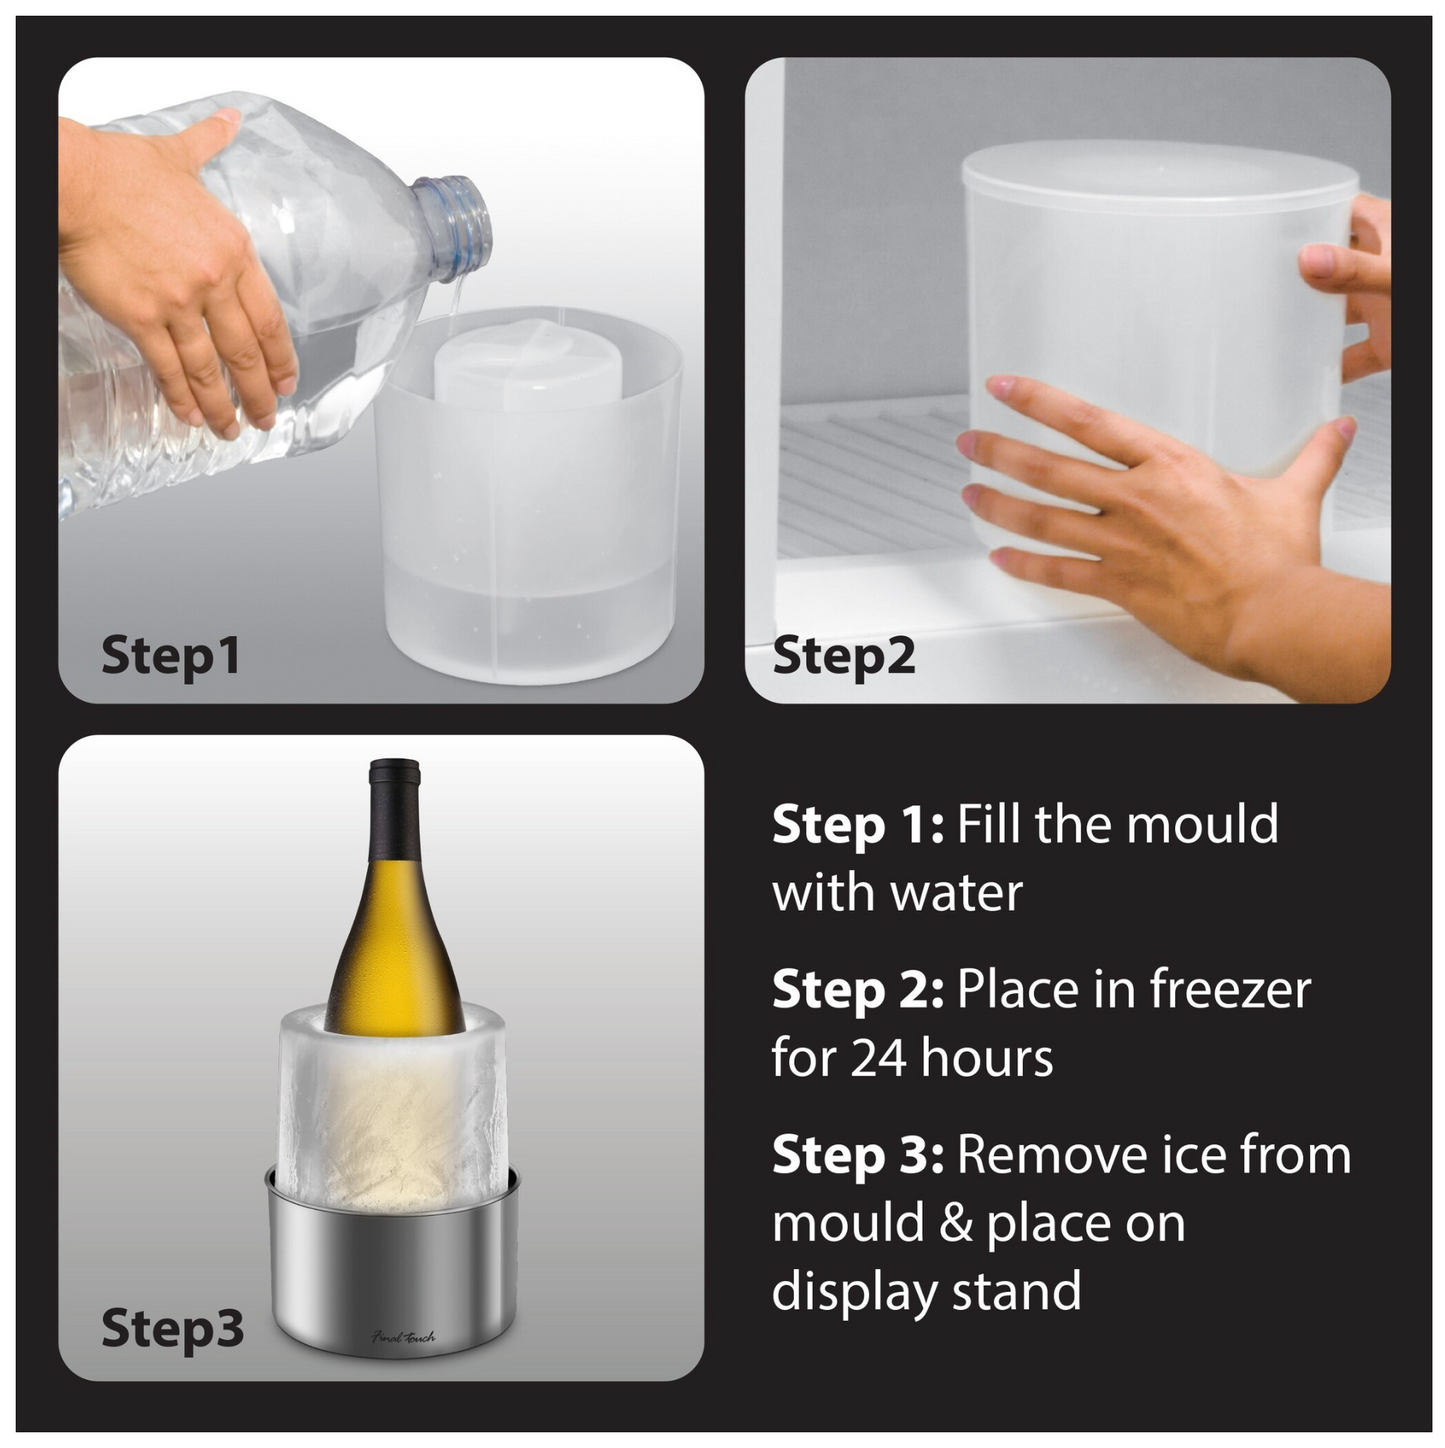 Directions on how to use the Ice Bottle Chiller: Step 1- Fill the mould with water. Step 2-Place in the freezer for 24 hours. Step 3- Remove ice from mould and place on display stand.